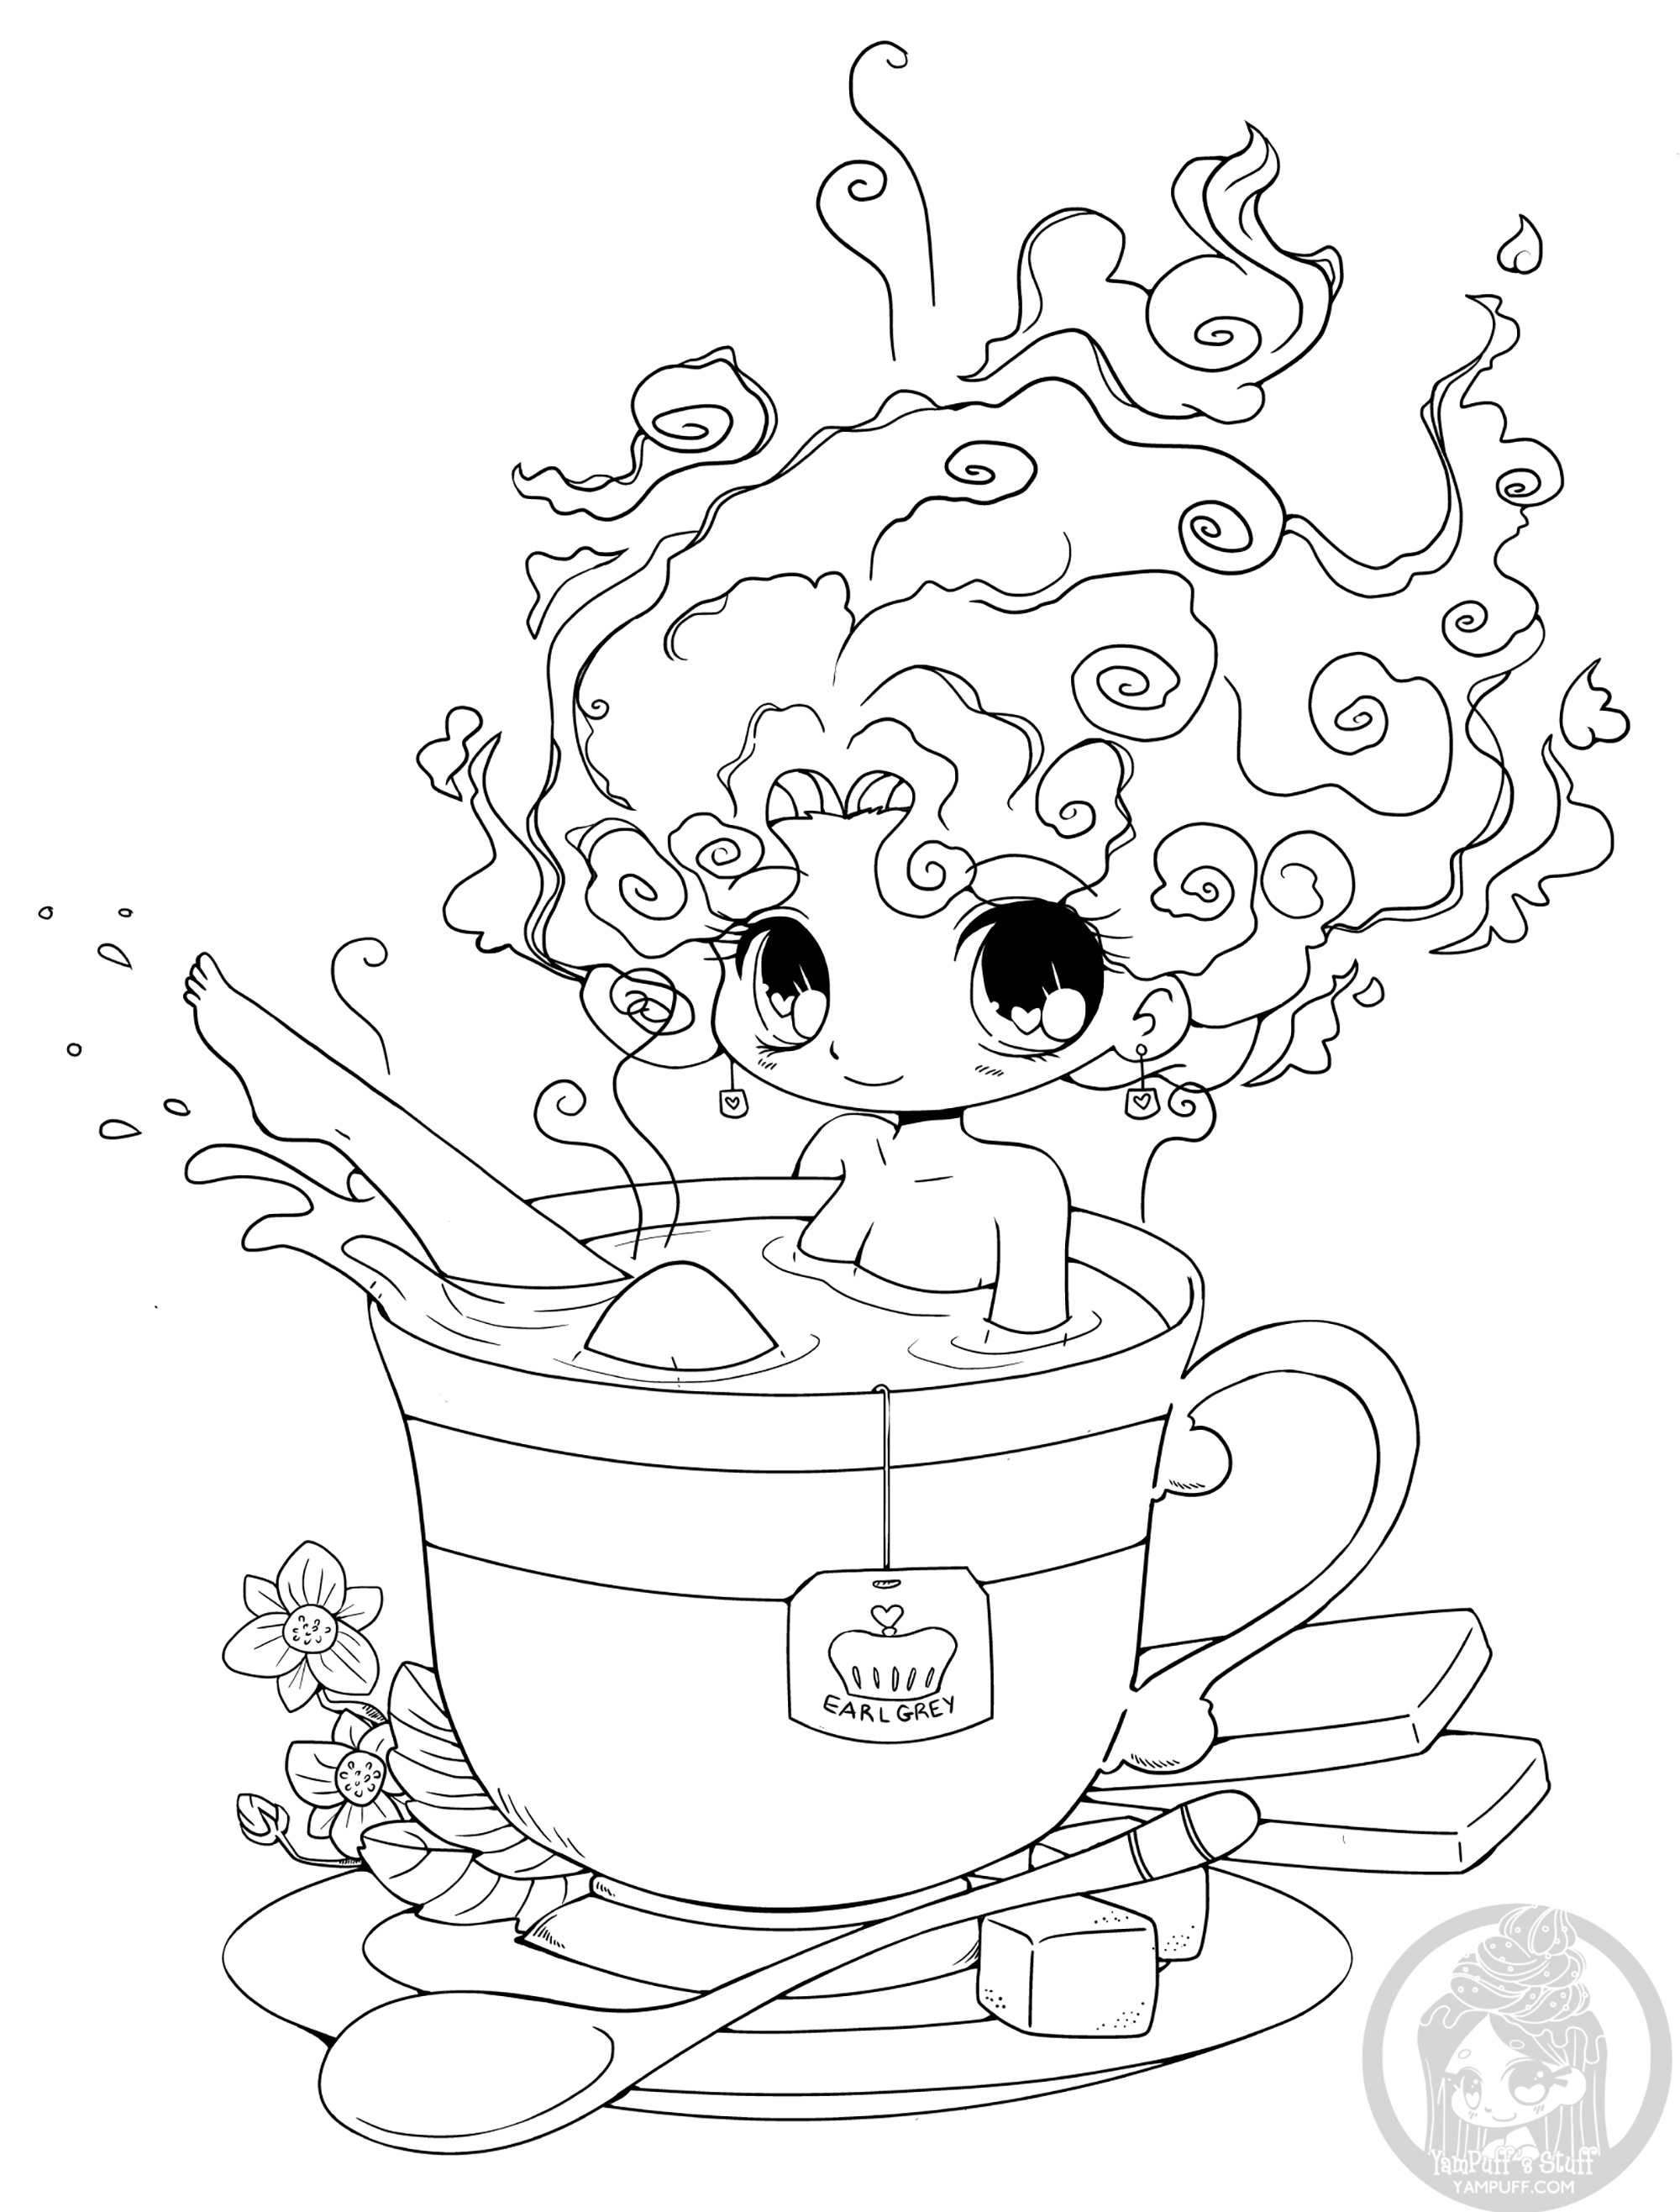 Teacup Coloring Pages To Print Kawaii To Print Kawaii Kids Coloring Pages